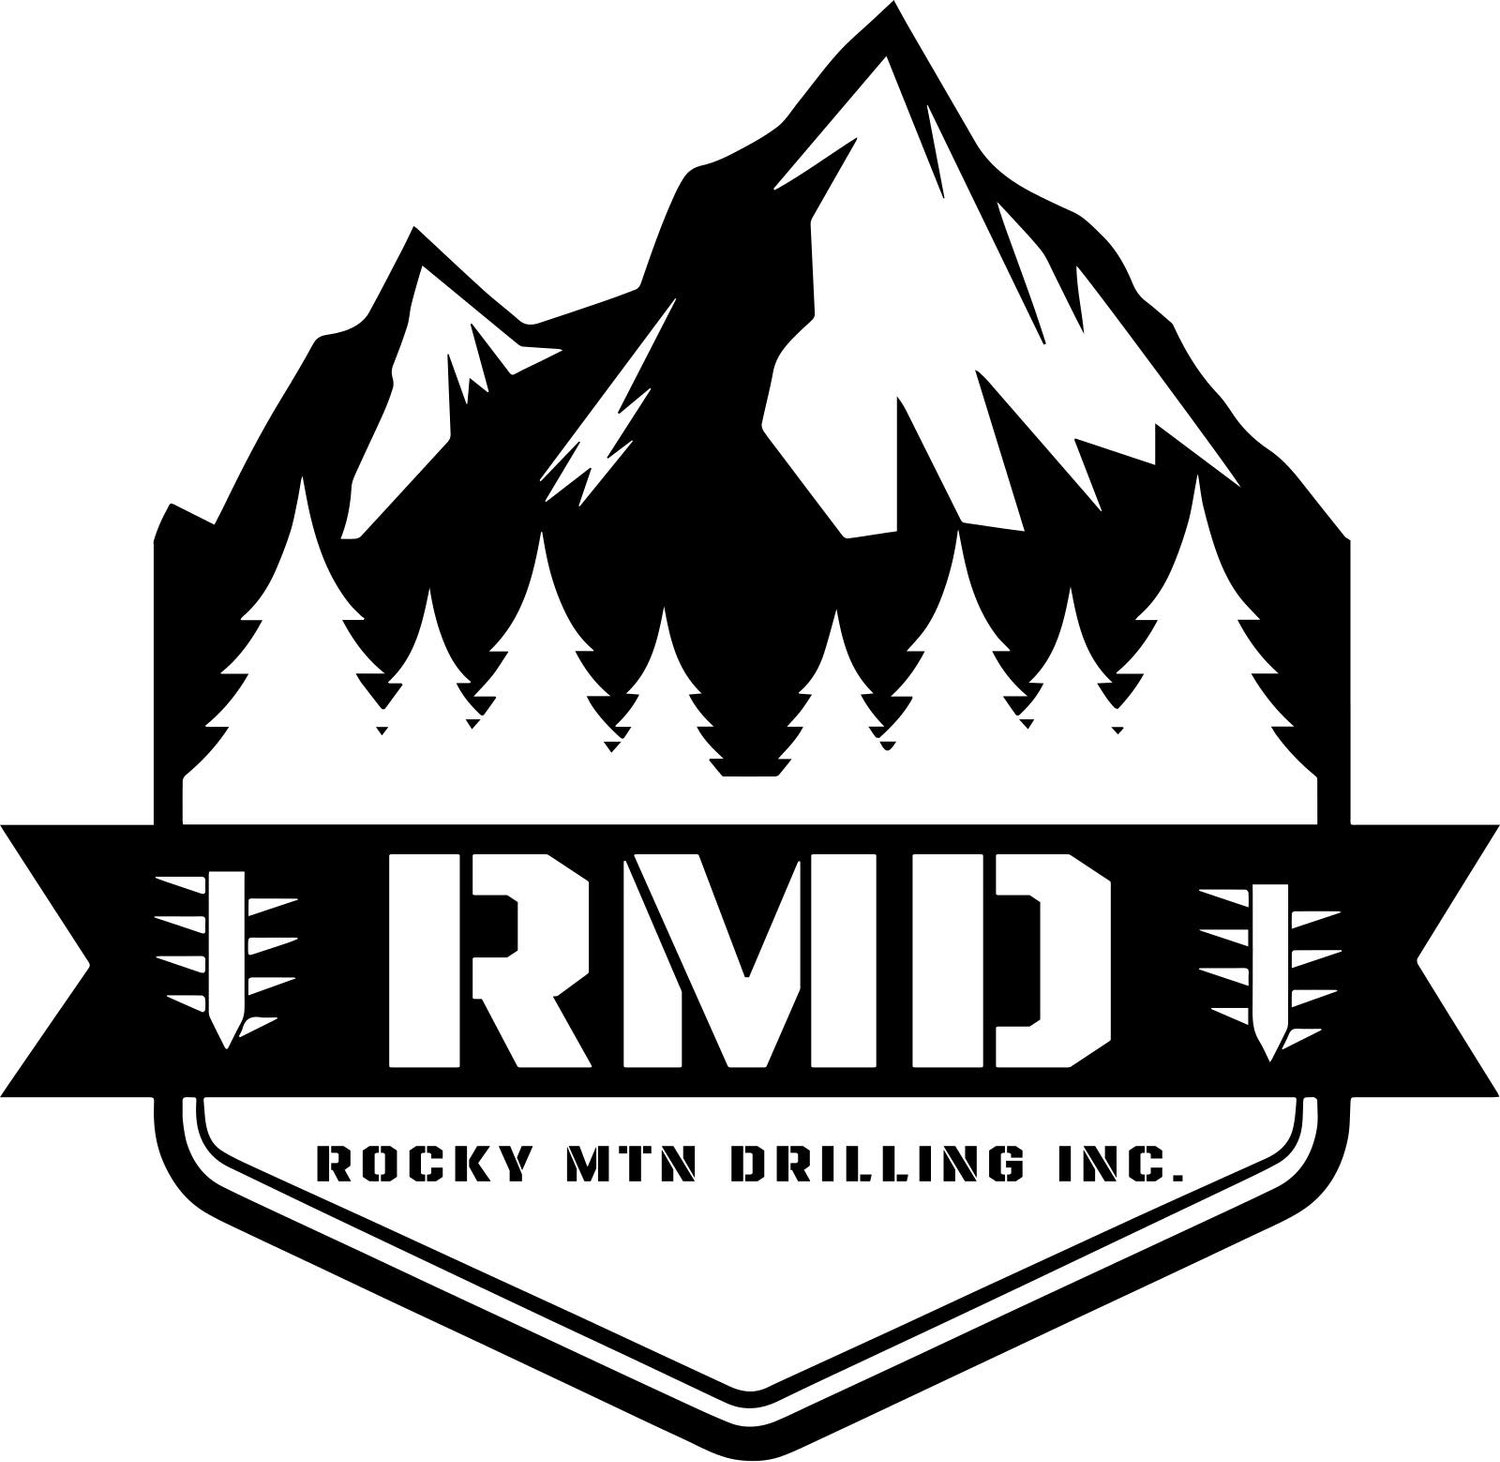 Rocky Mountain Drilling